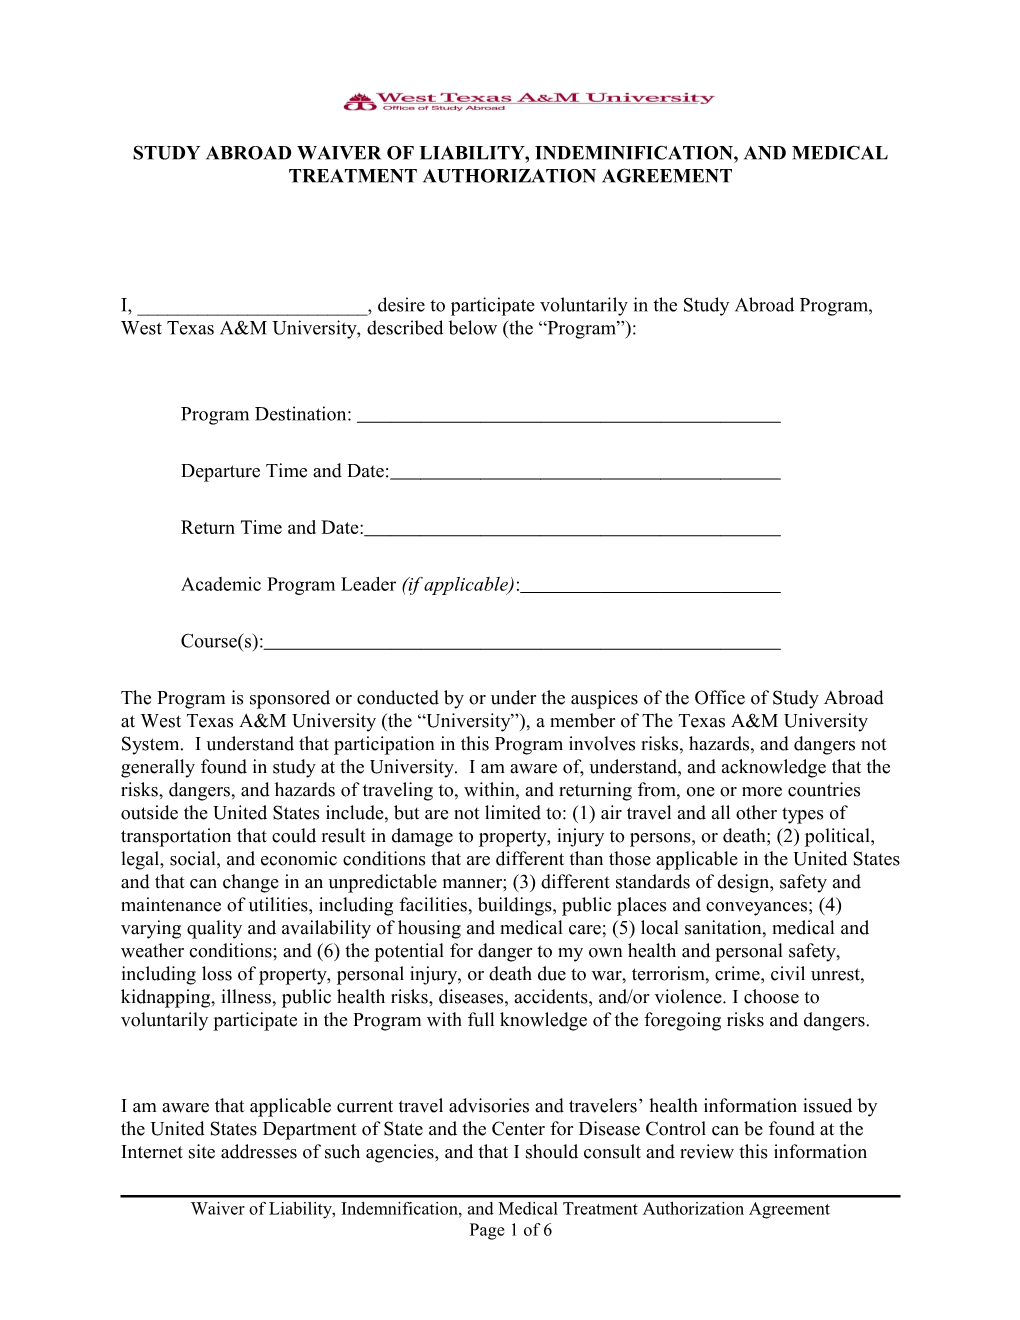 Study Abroad Waiver of Liability, Indeminification, and Medical Treatment Authorization